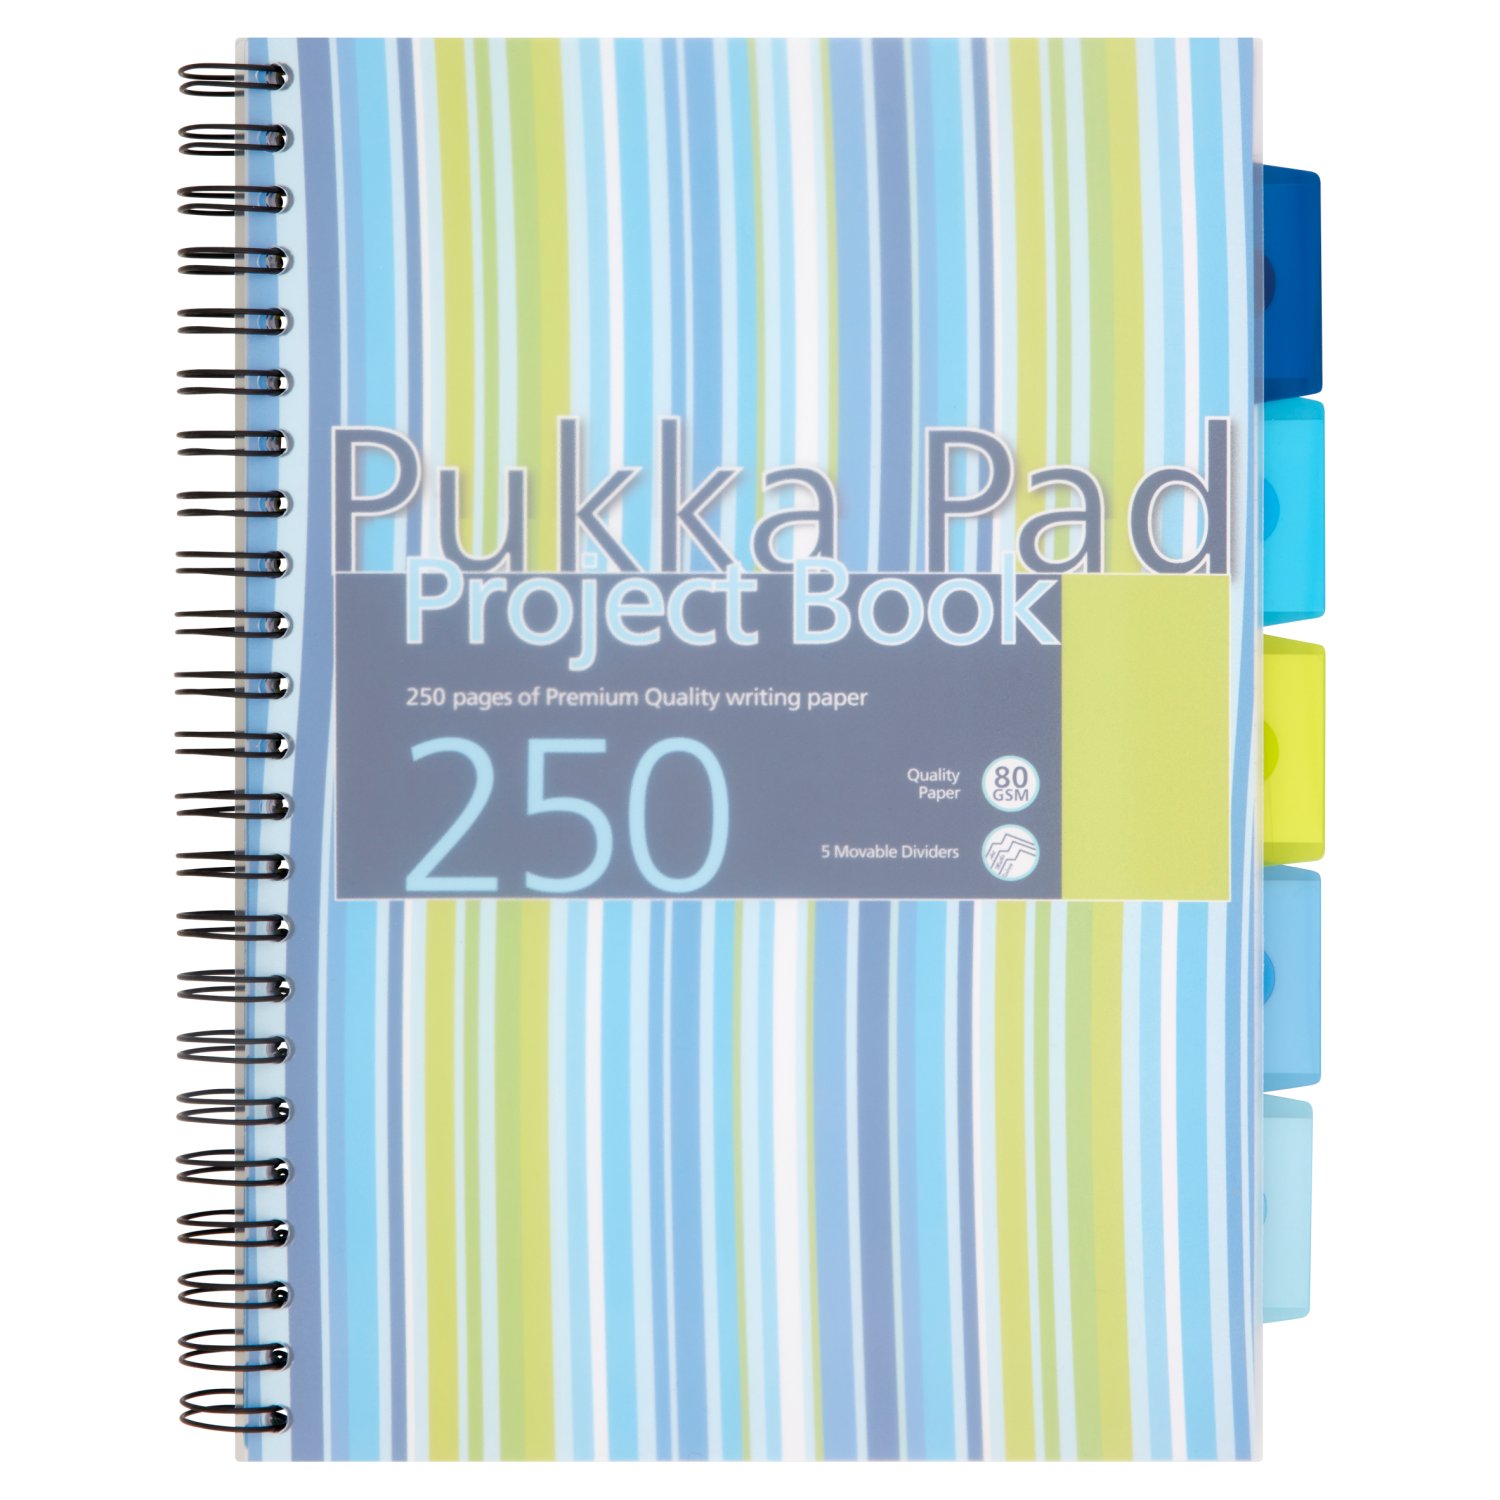 The 'Write' Product For You
® Pukka Pads UK Ltd. All Rights Reserved.

FSC - FSC® Mix, Paper, FSC®, C123828